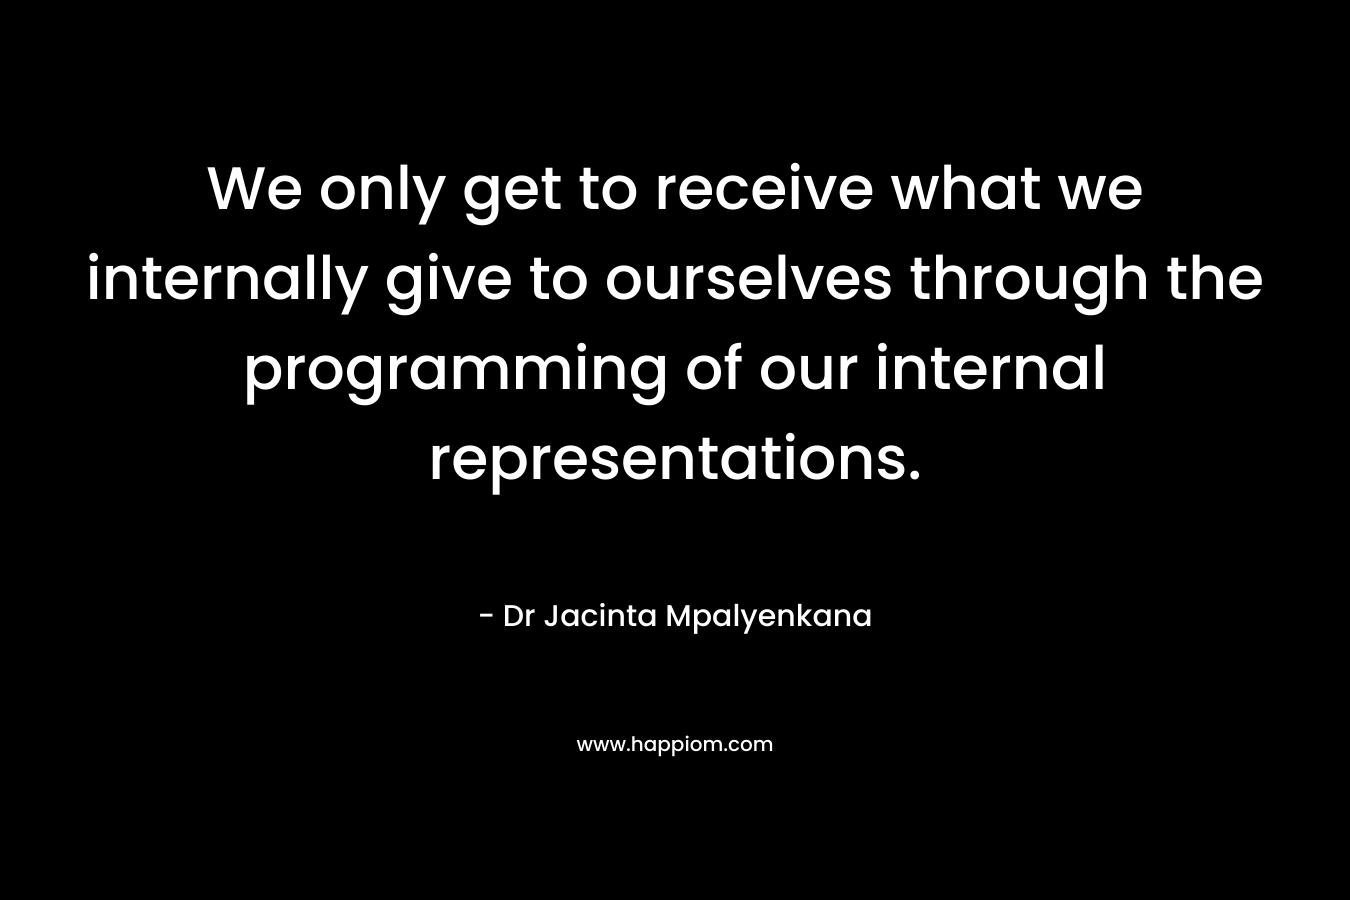 We only get to receive what we internally give to ourselves through the programming of our internal representations.